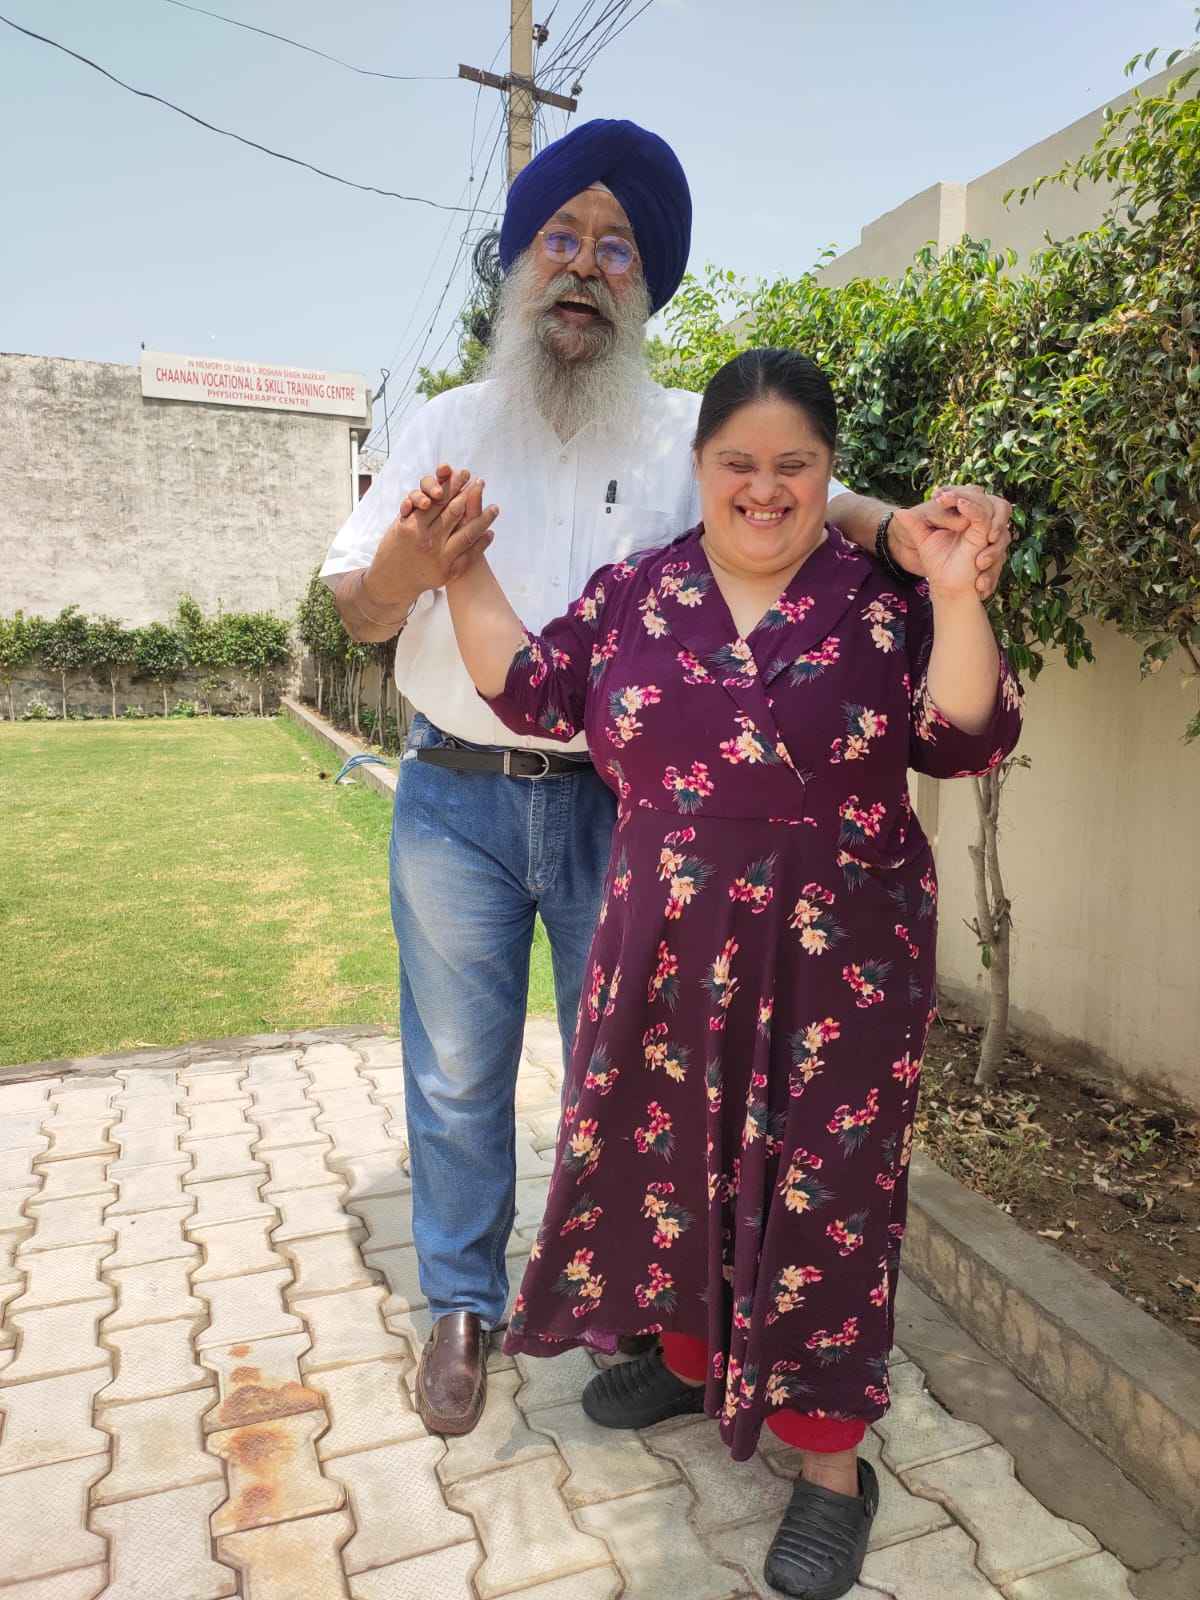 amarjit singh anand founder of chaanan punjab with his daughter who has down syndrome